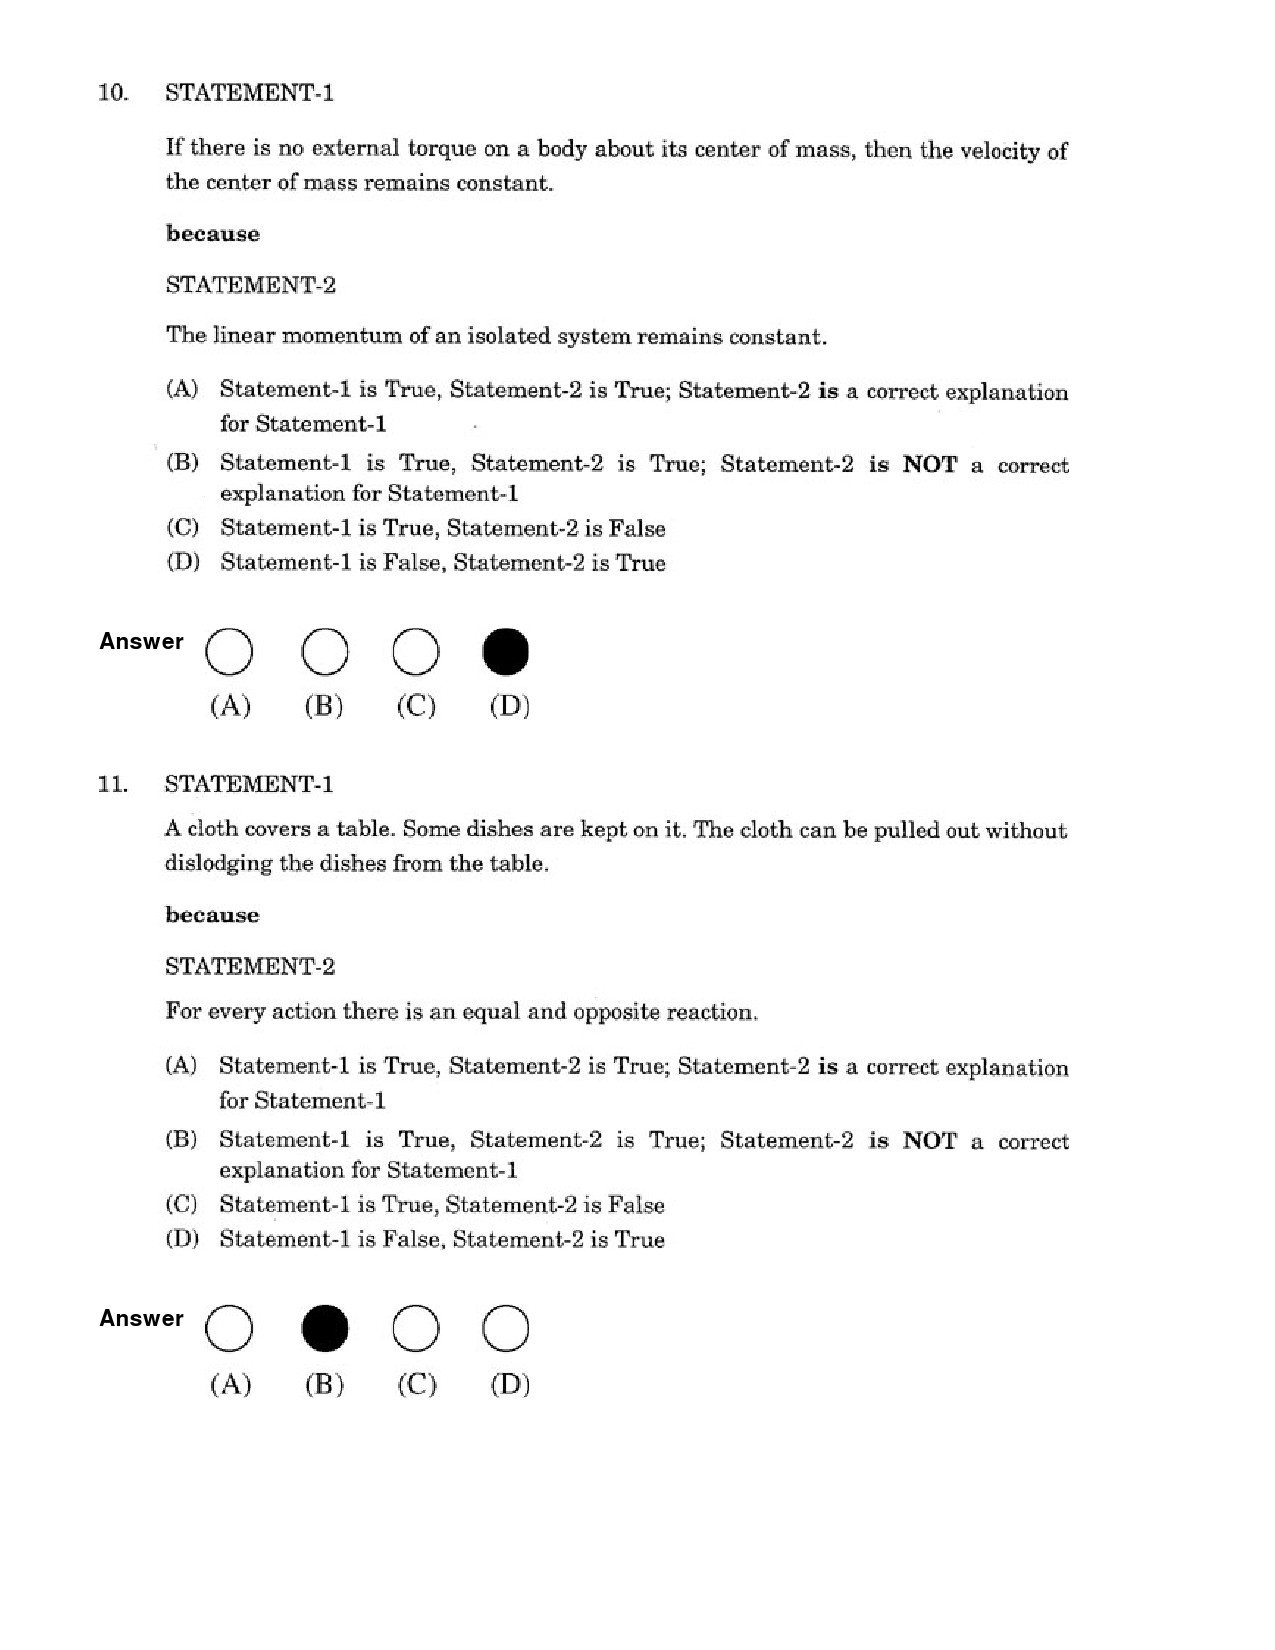 JEE Exam Question Paper 2007 Paper 2 5